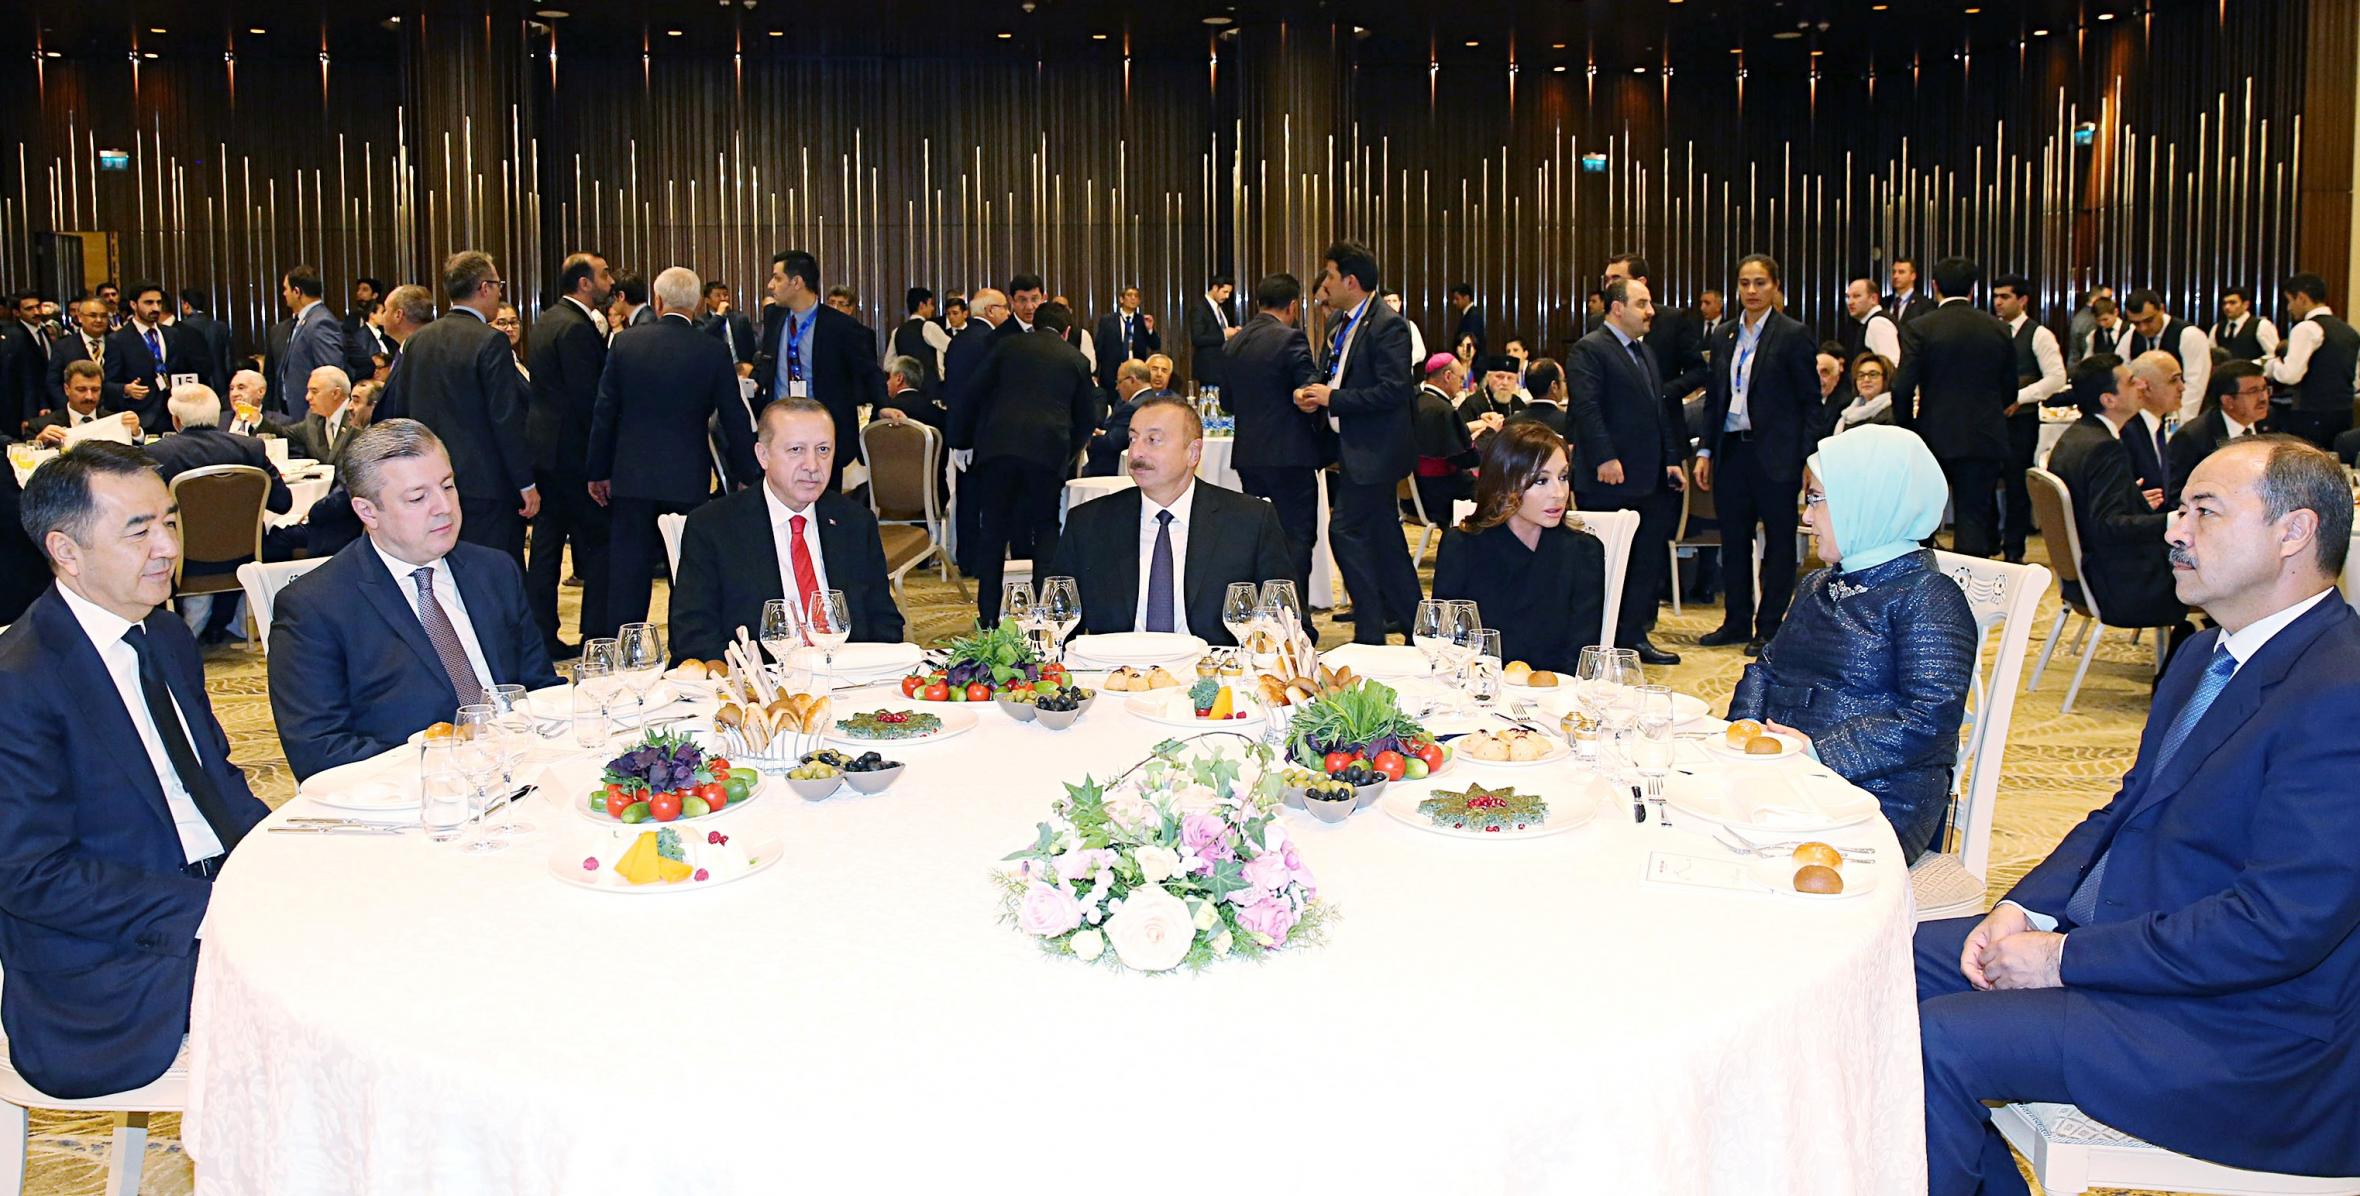 Reception was hosted for participants of opening ceremony of Baku-Tbilisi-Kars railway